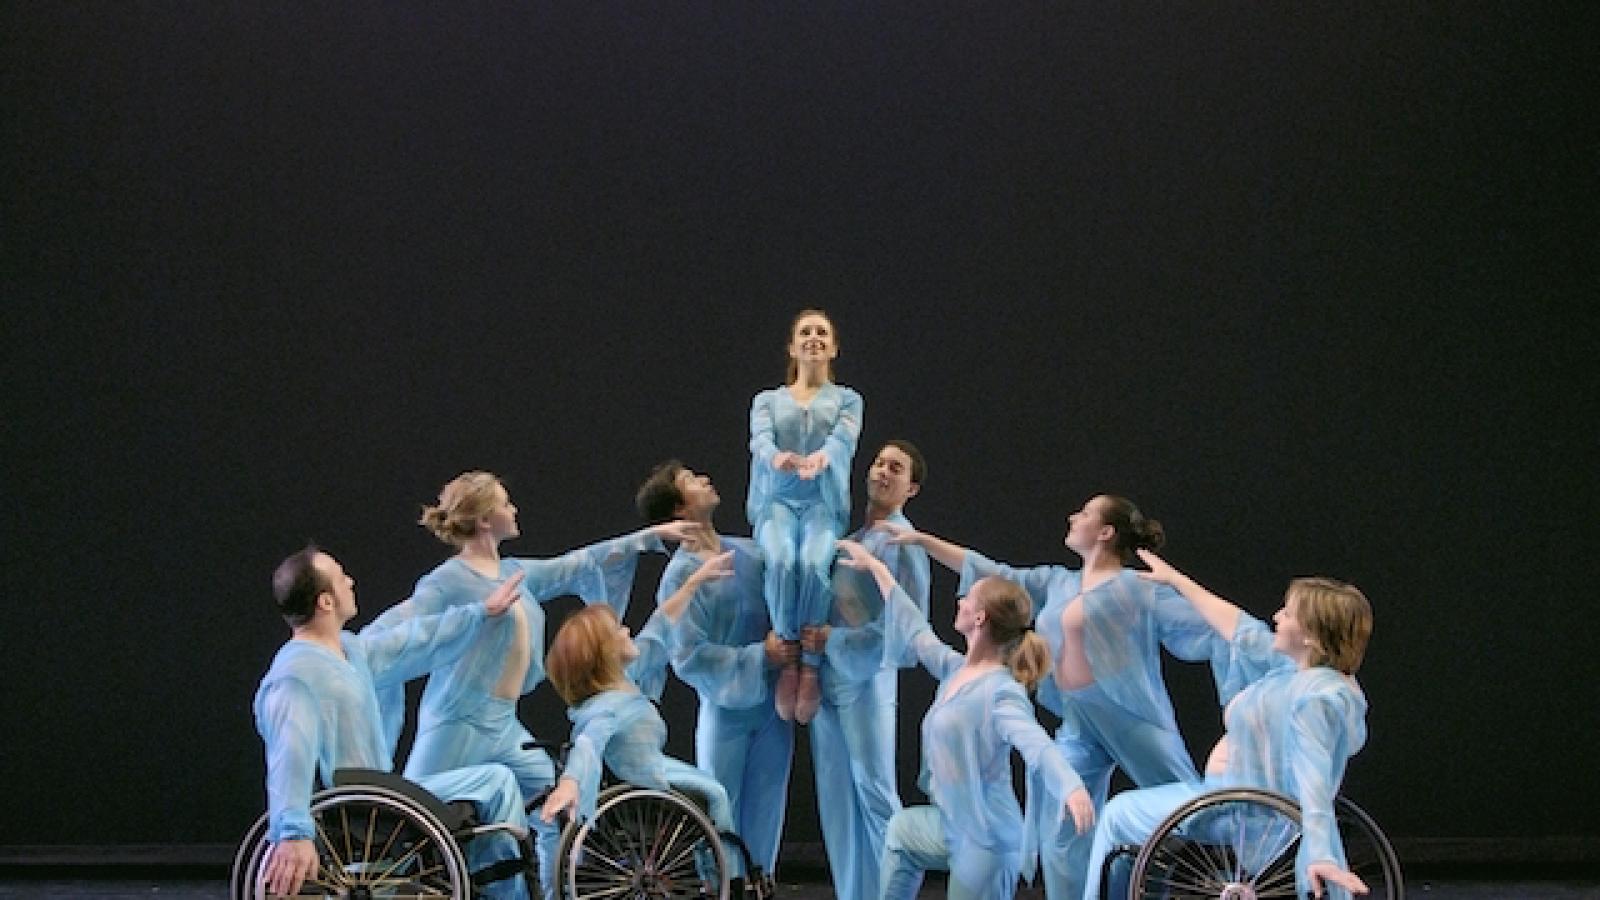 an ensemble of dancers some of whom are in wheelchairs performing on stage